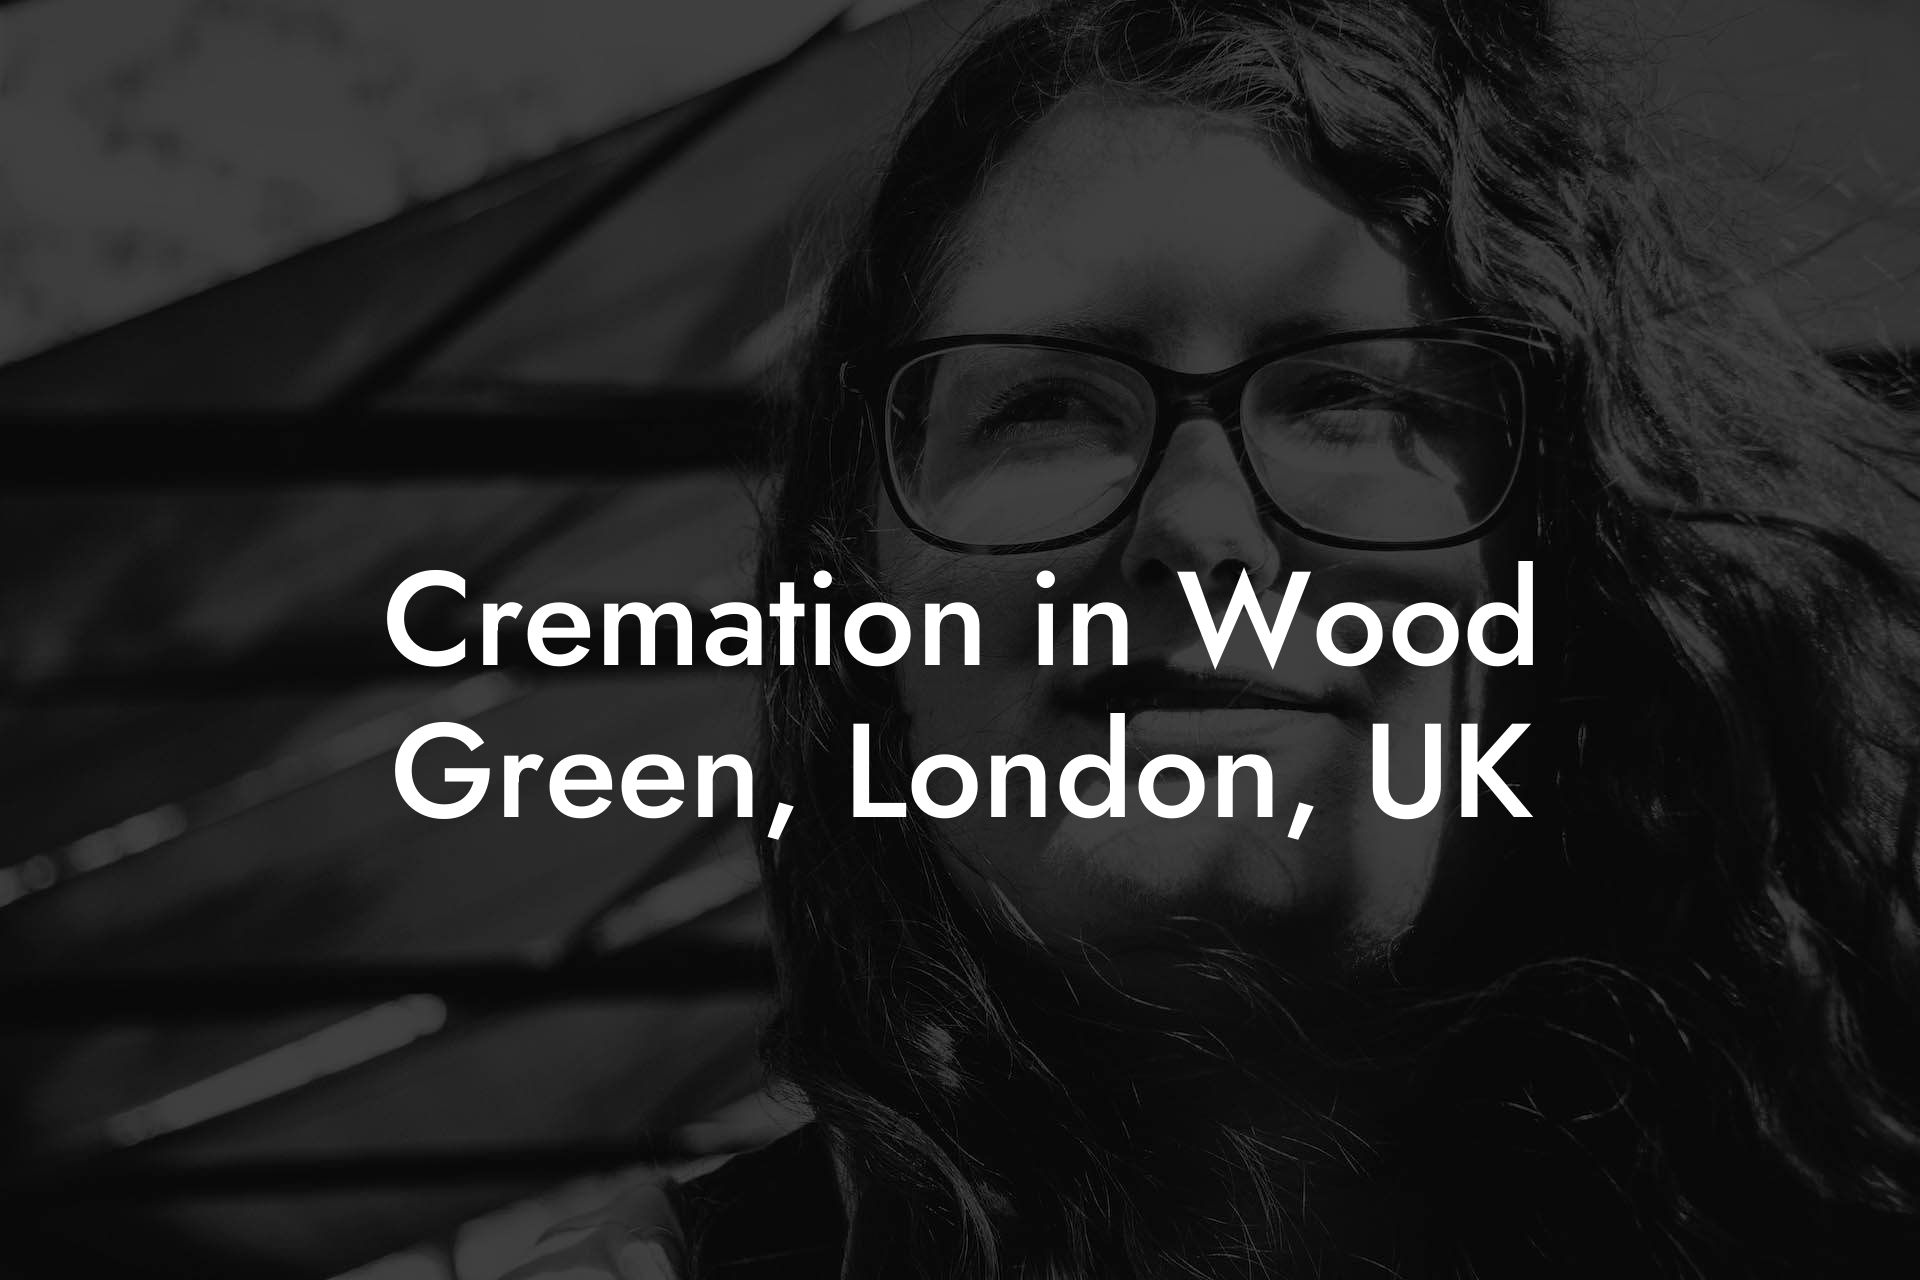 Cremation in Wood Green, London, UK